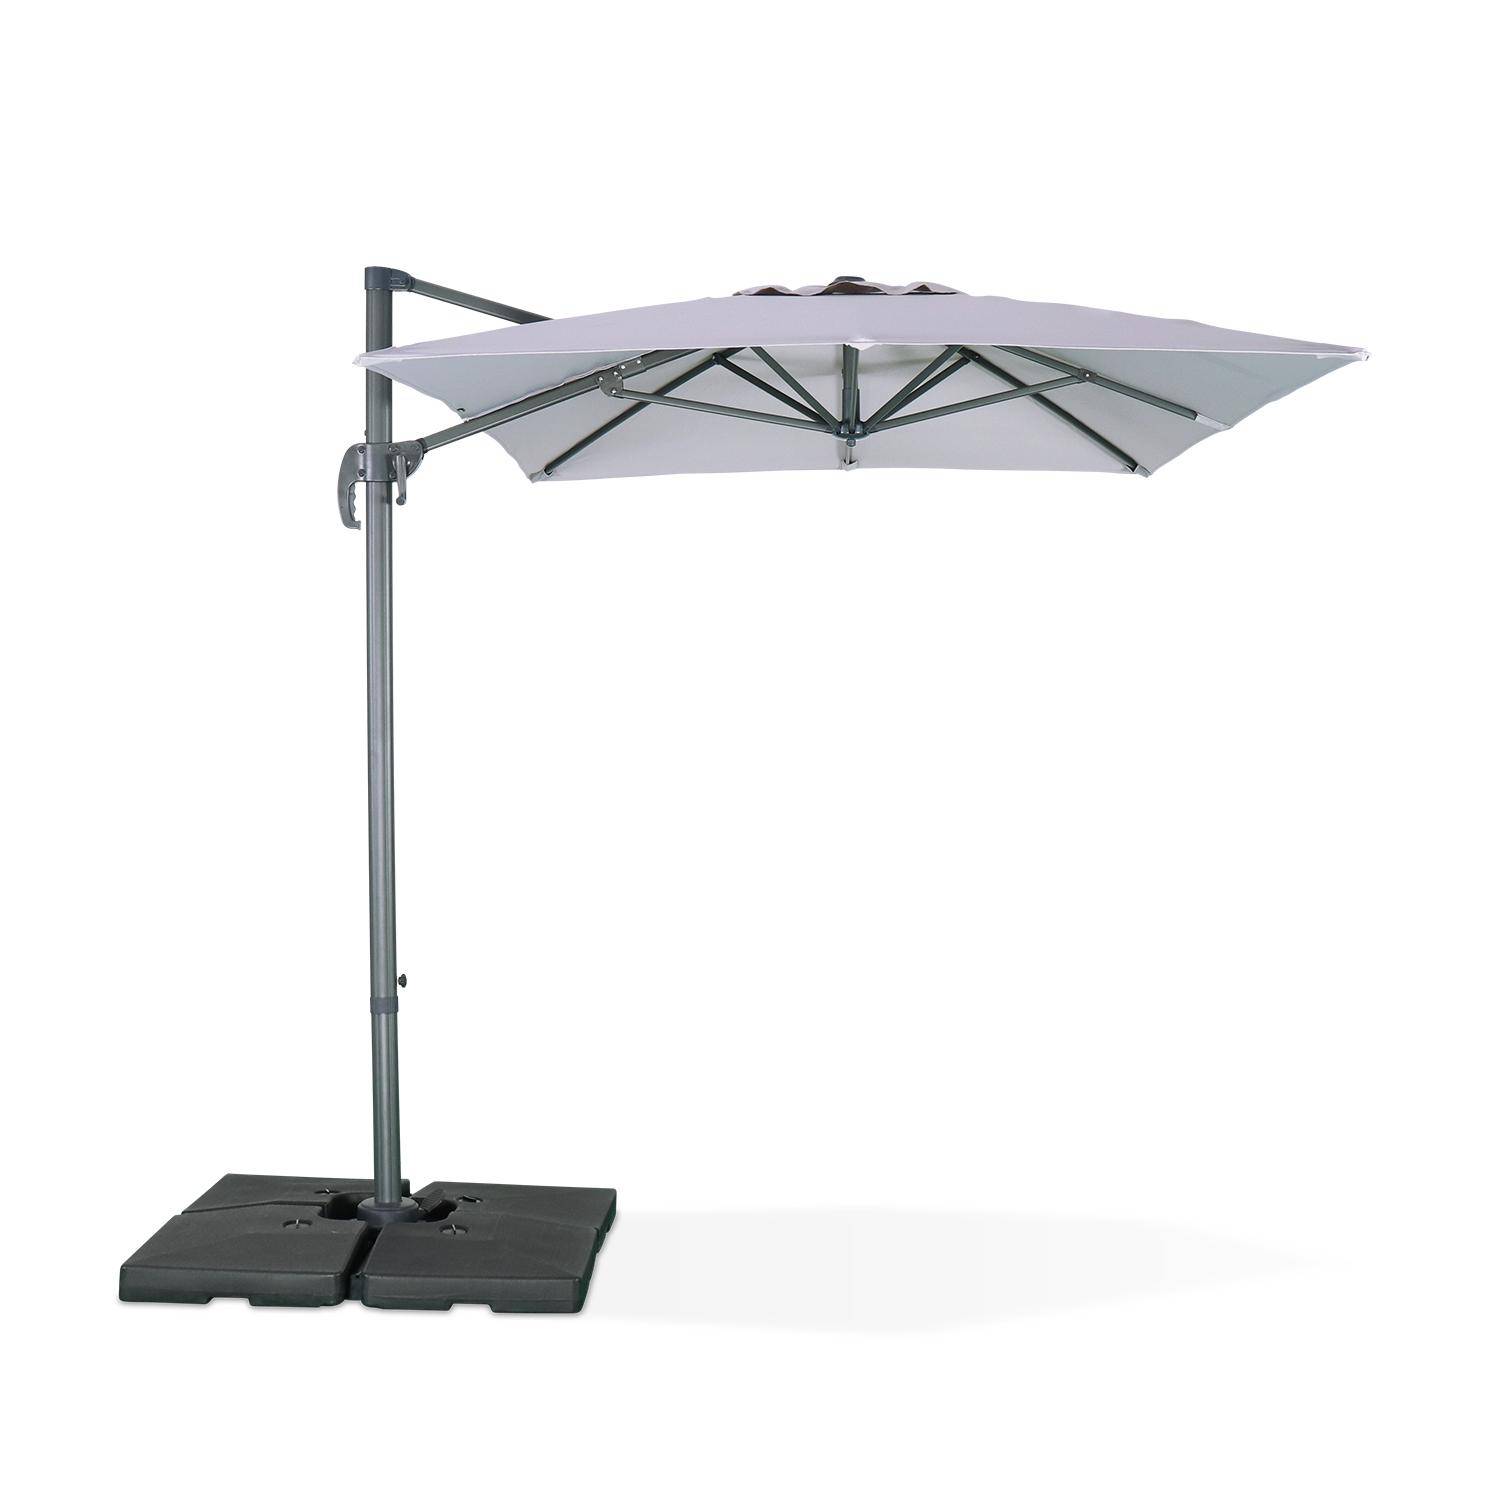 2x3m rectangular cantilever parasol - parasol can be tilted, folded and rotated 360 degrees - Antibes - Light Grey Photo2